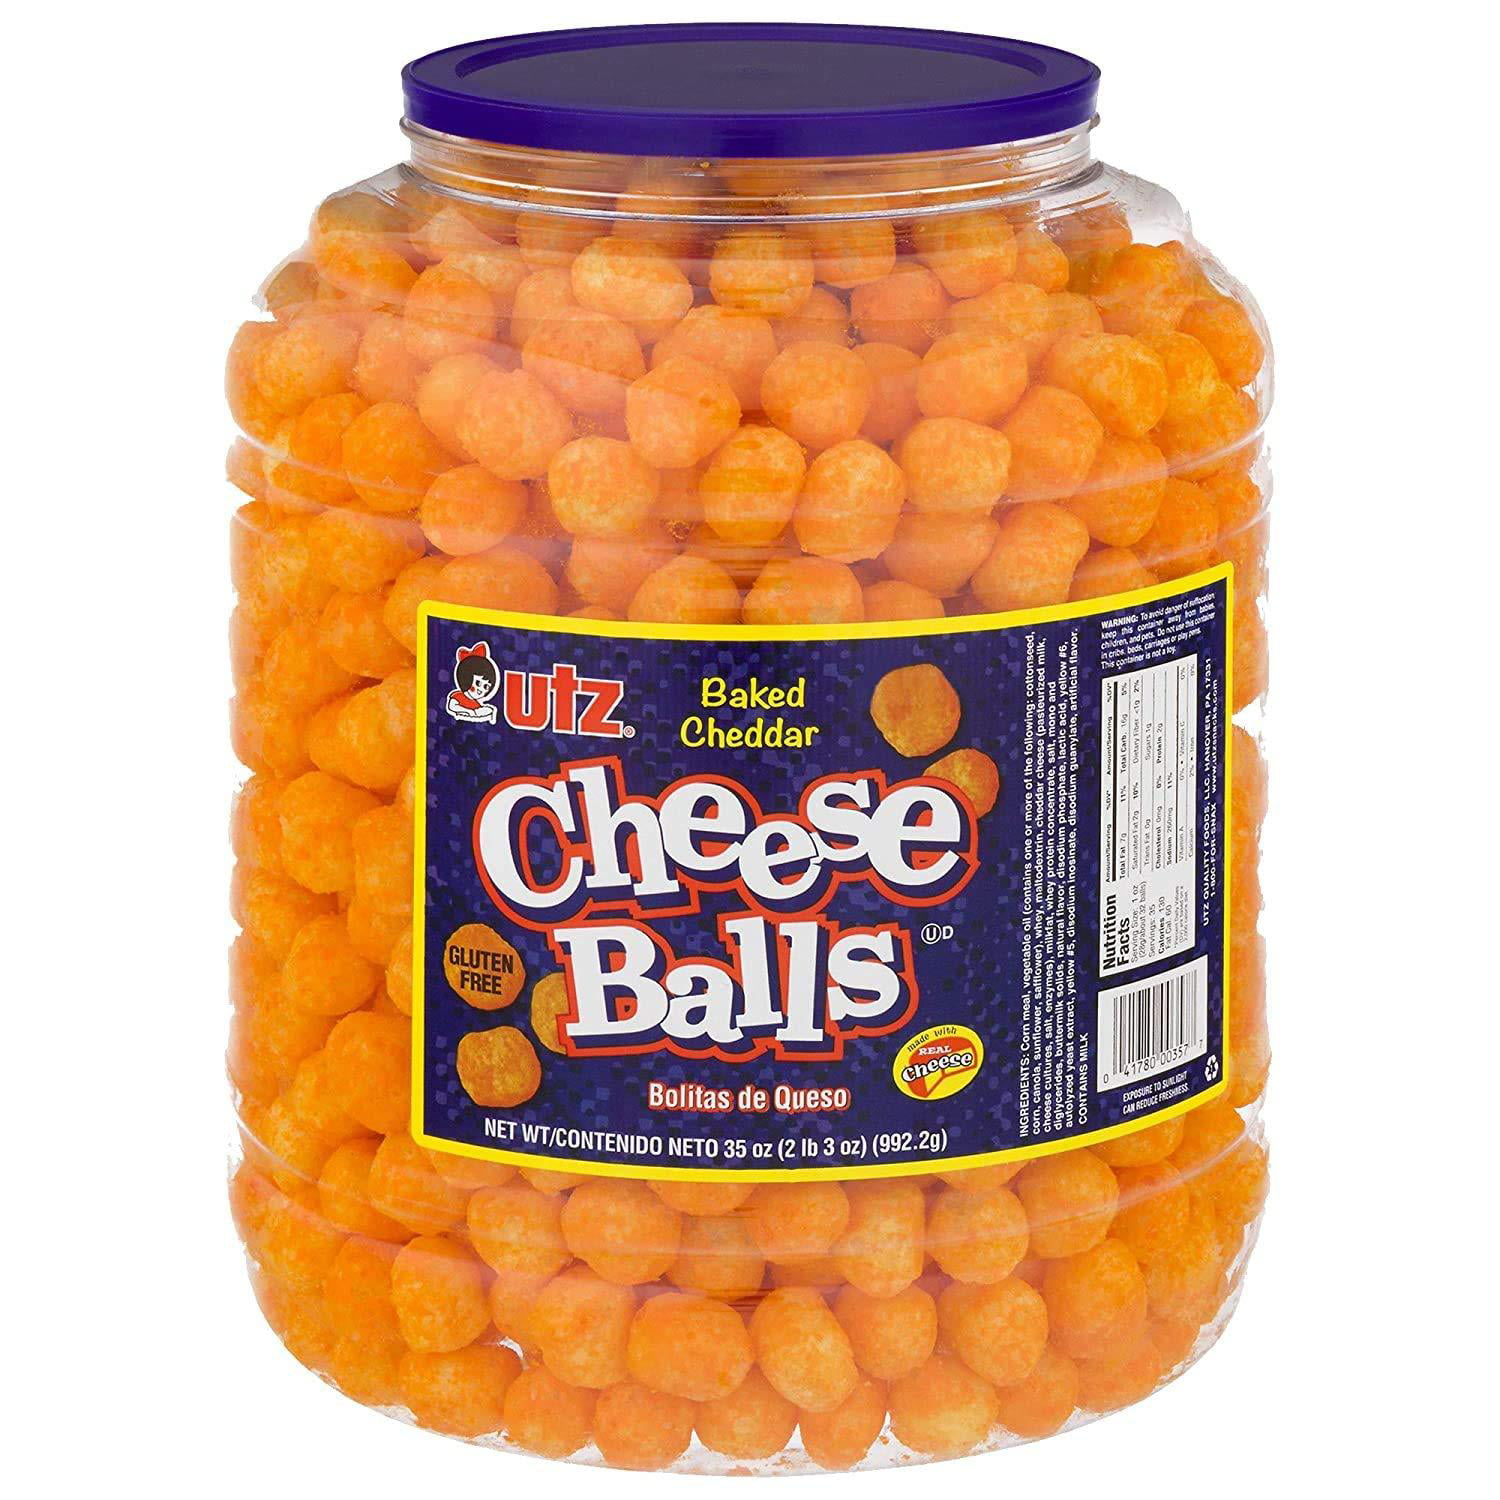 Utz Cheese Balls &ndash; 35 Ounce Barrel (2 lbs) &ndash; Made with Real Cheese, Resealable Container, Gluten Free, Easy and Quick Party Snack 2.18 Pound (Pack of 1)